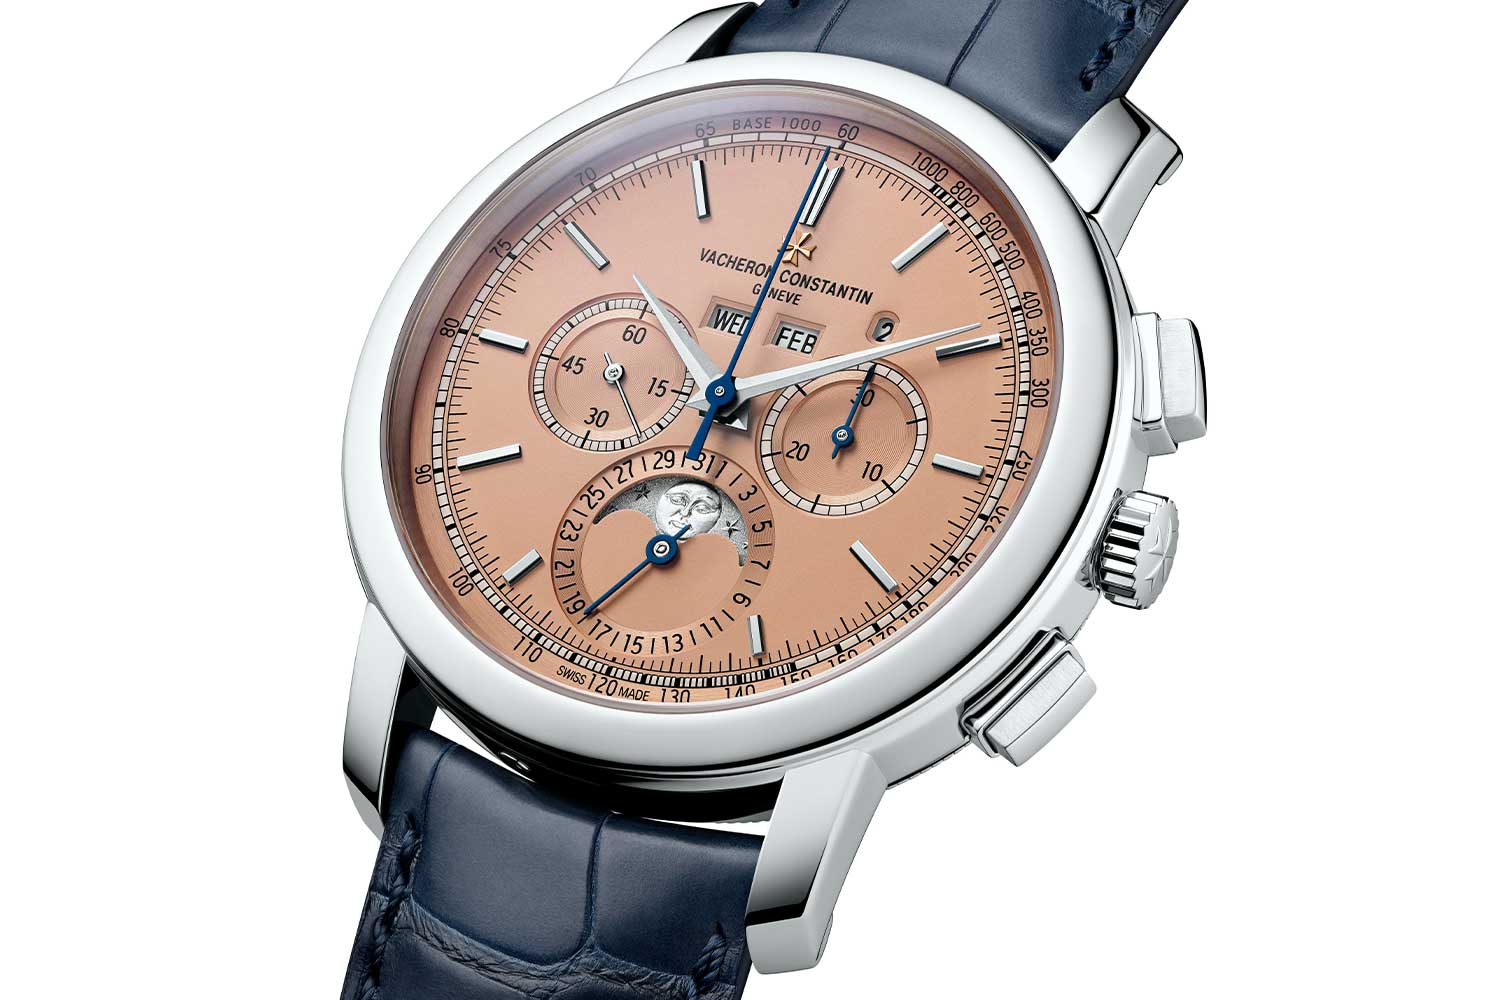 Traditionnelle Perpetual Calendar Chronograph in platinum with salmon colored dial